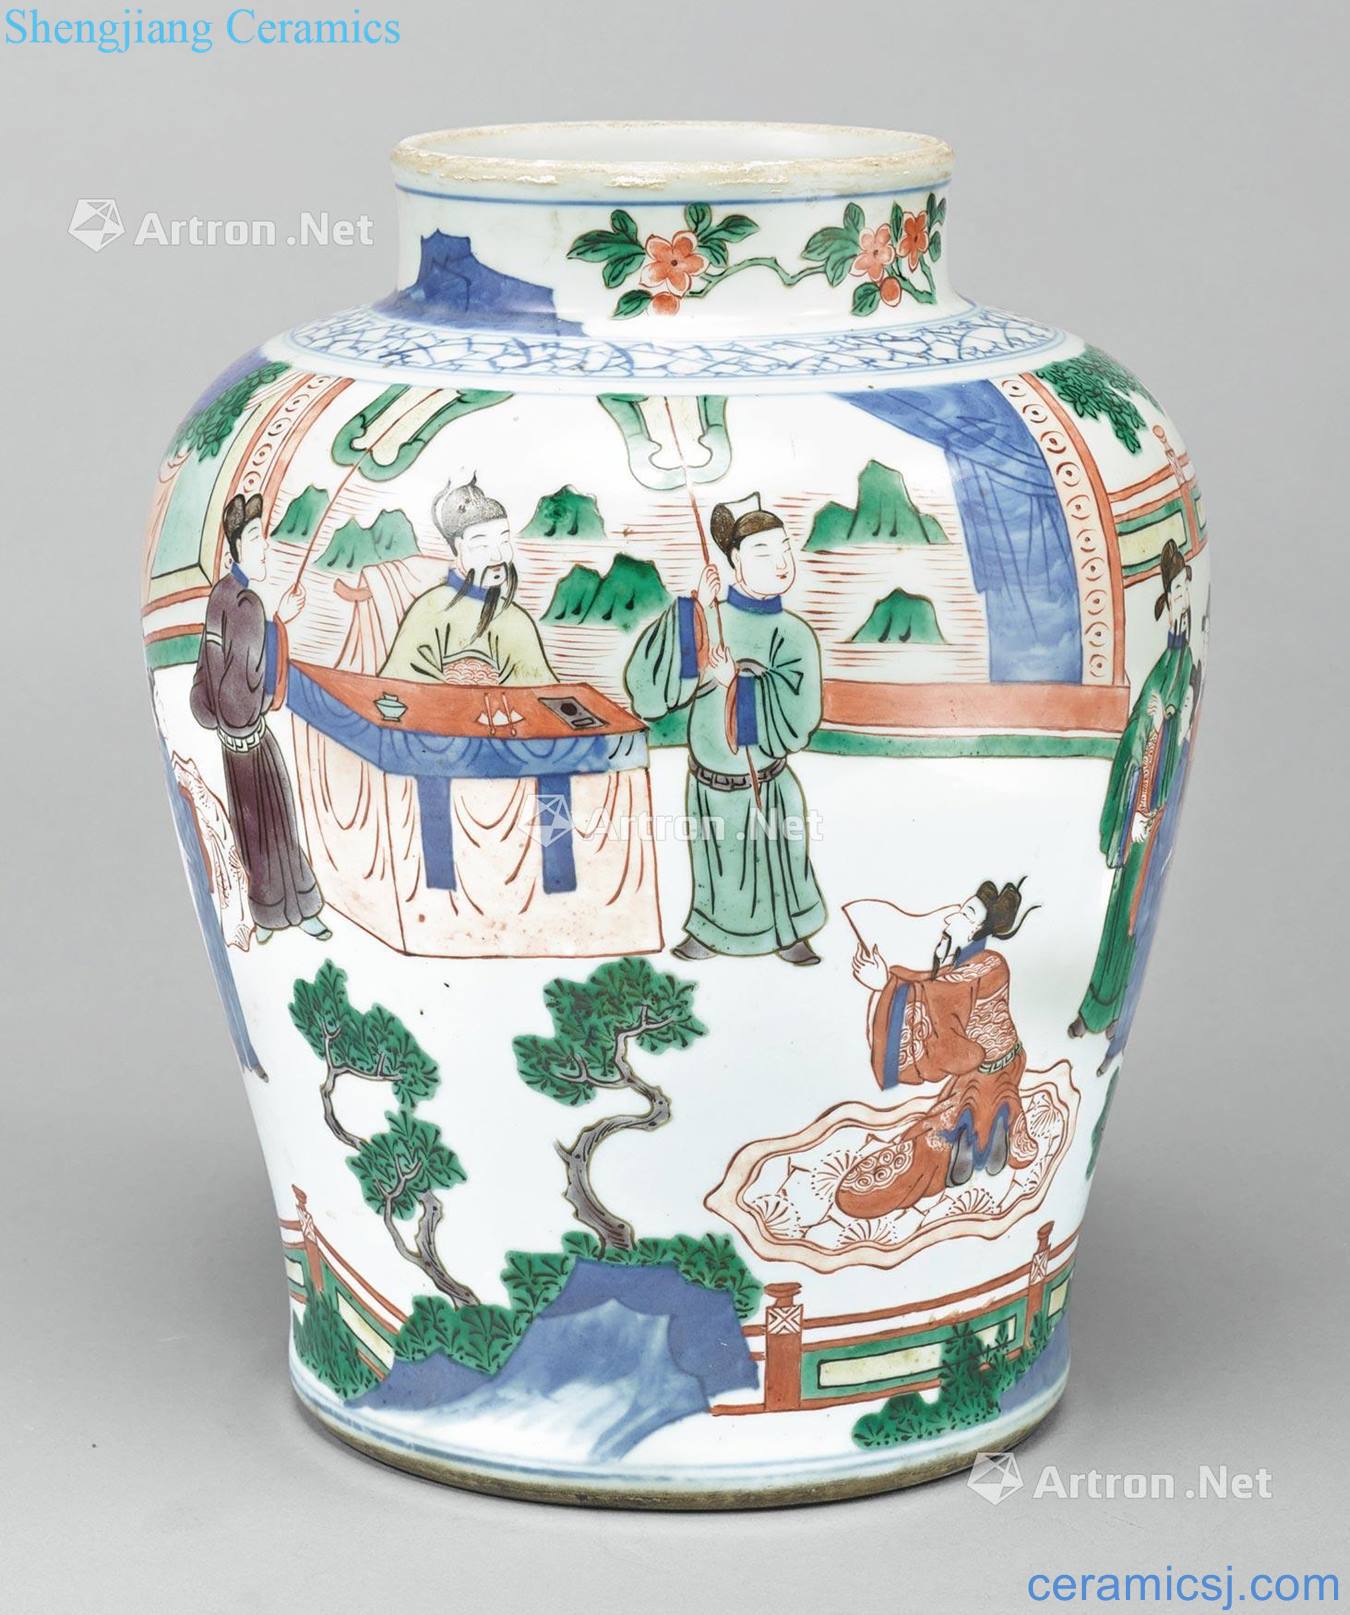 Qing dynasty in the 19th century Stories of colorful figure cans